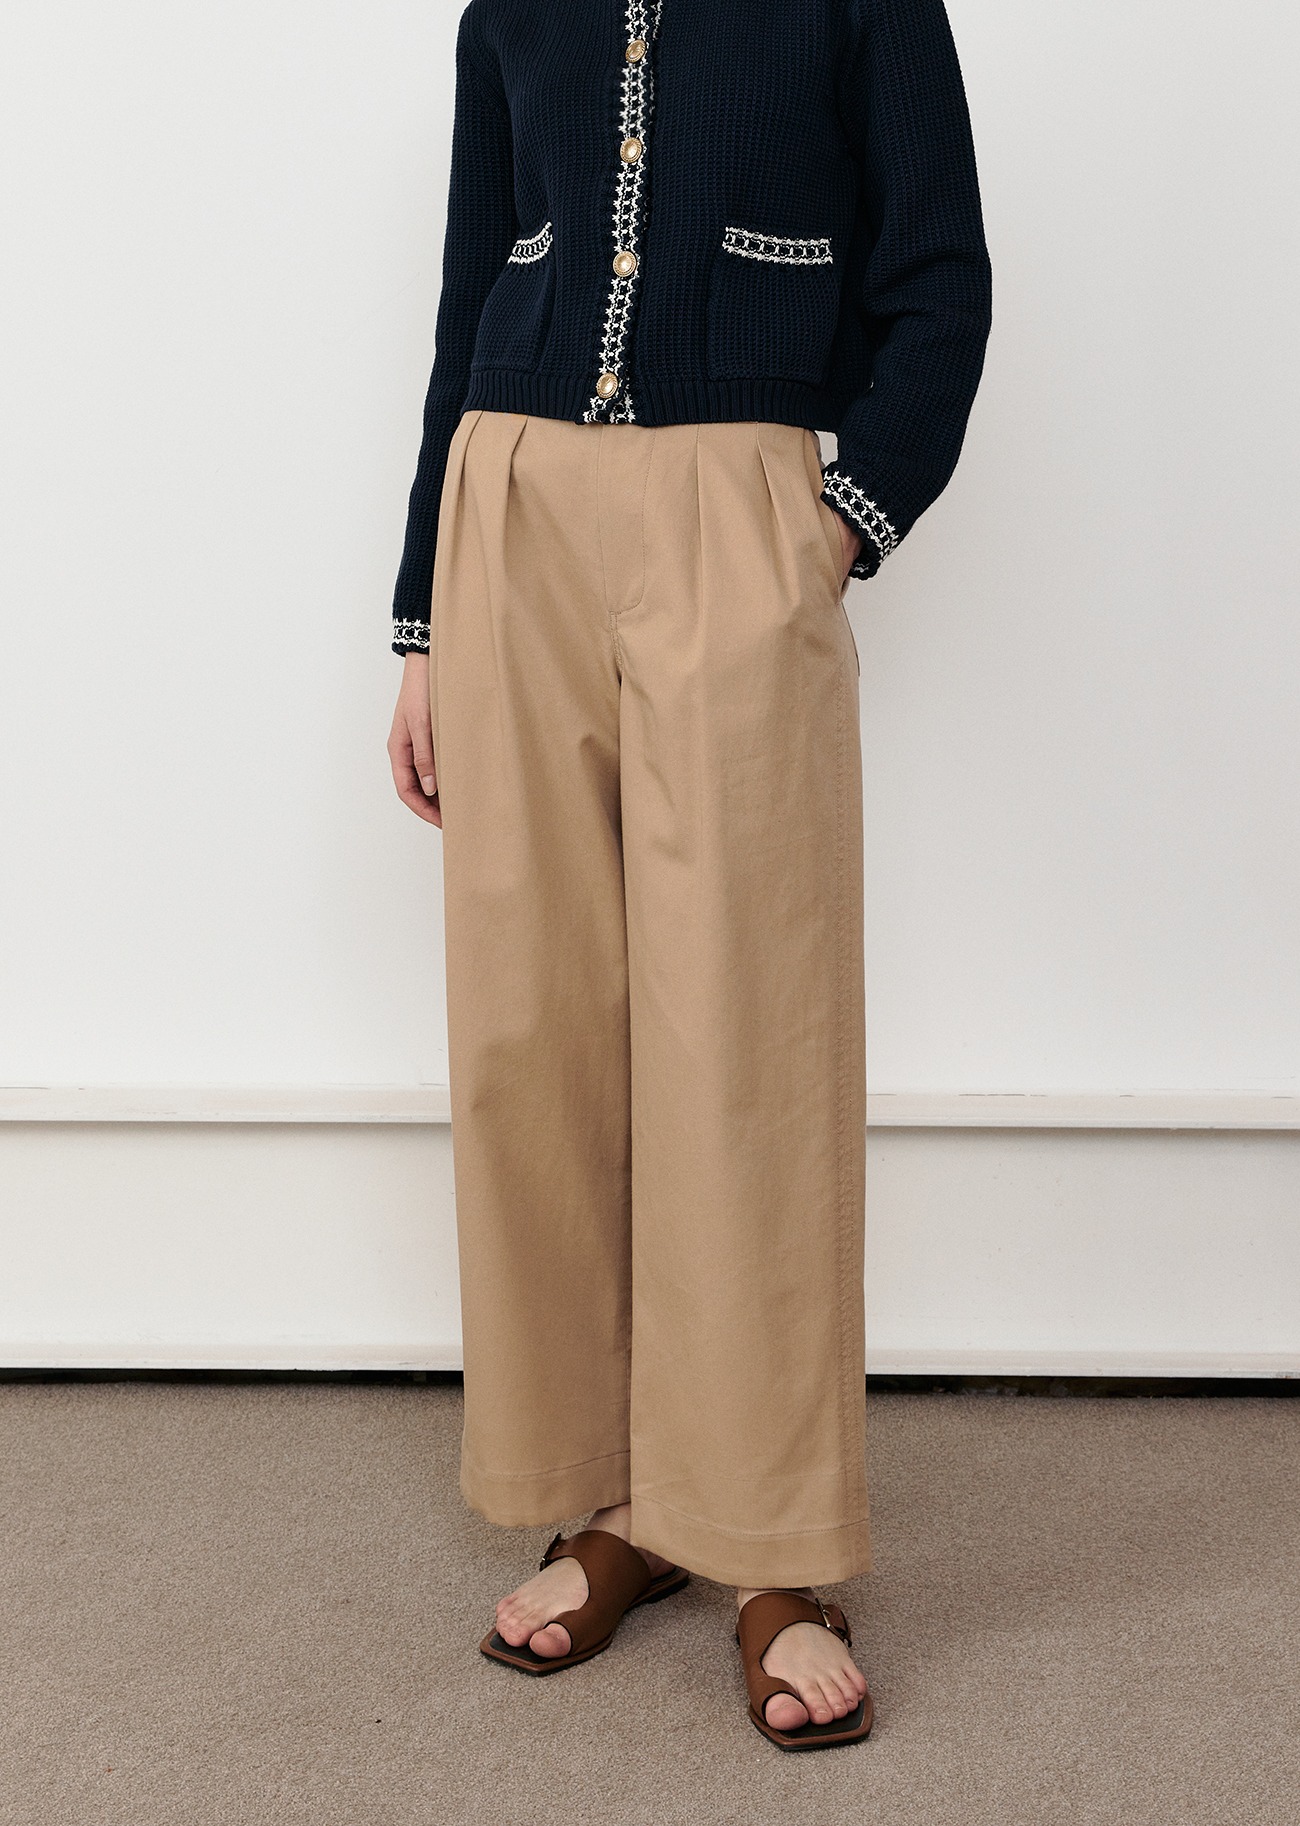 Cropped two-tuck cotton pants - Beige